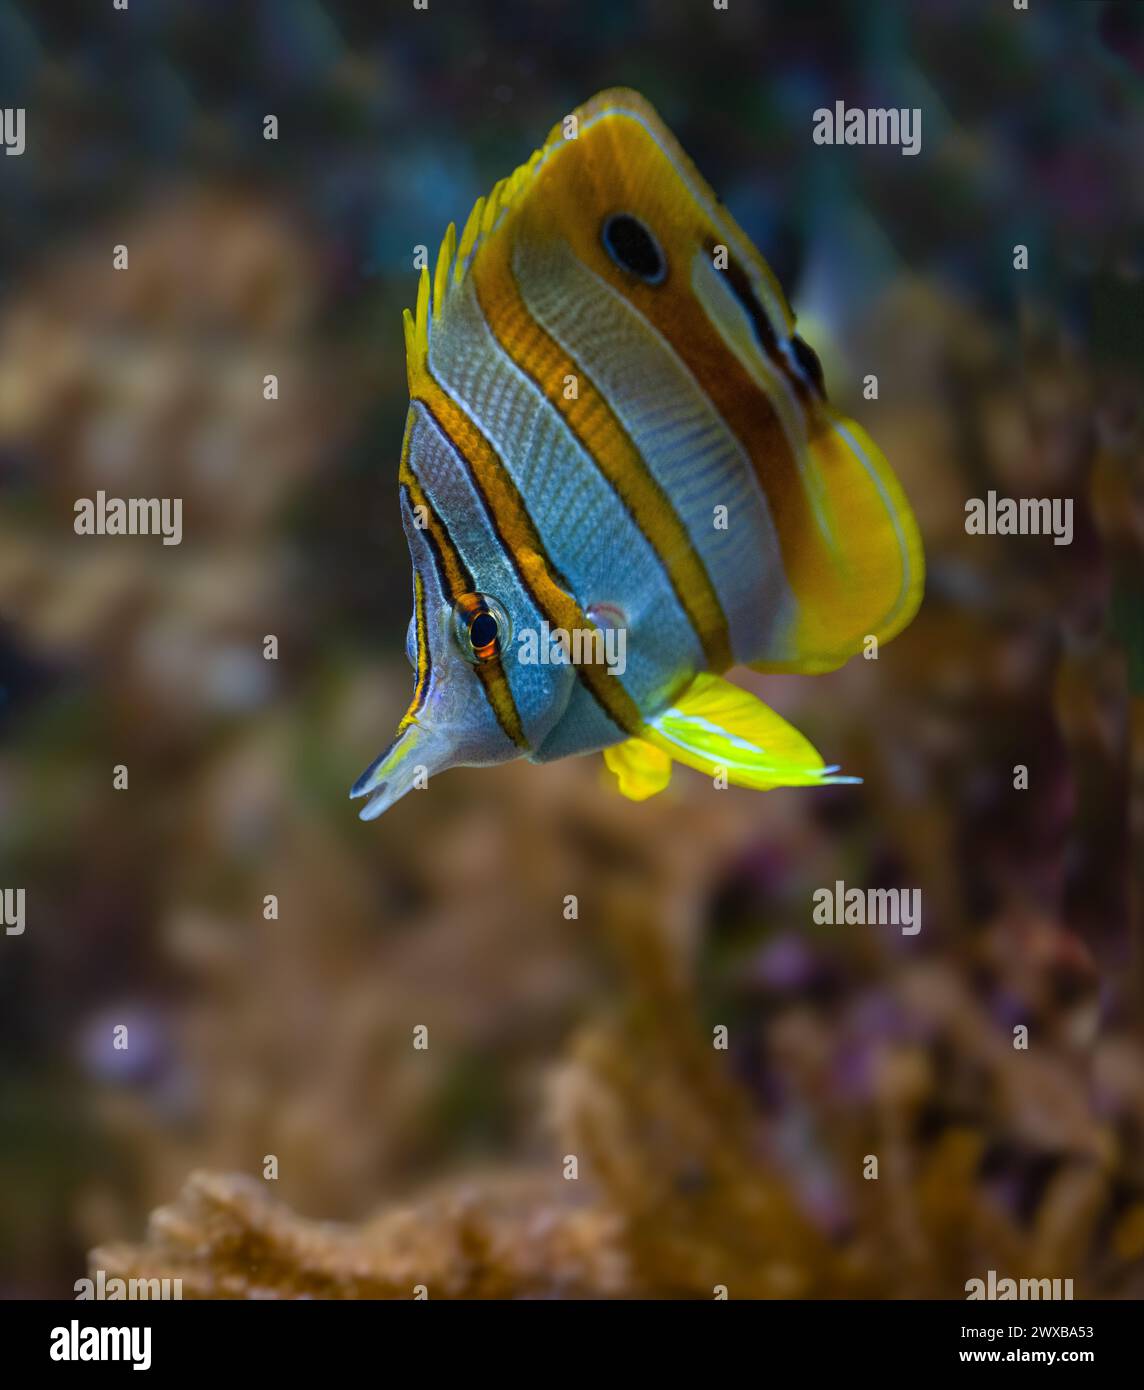 The copperband butterflyfish (Chelmon rostratus), also known as the beaked coral fish, is found in reefs in both the Pacific and Indian Oceans. Stock Photo